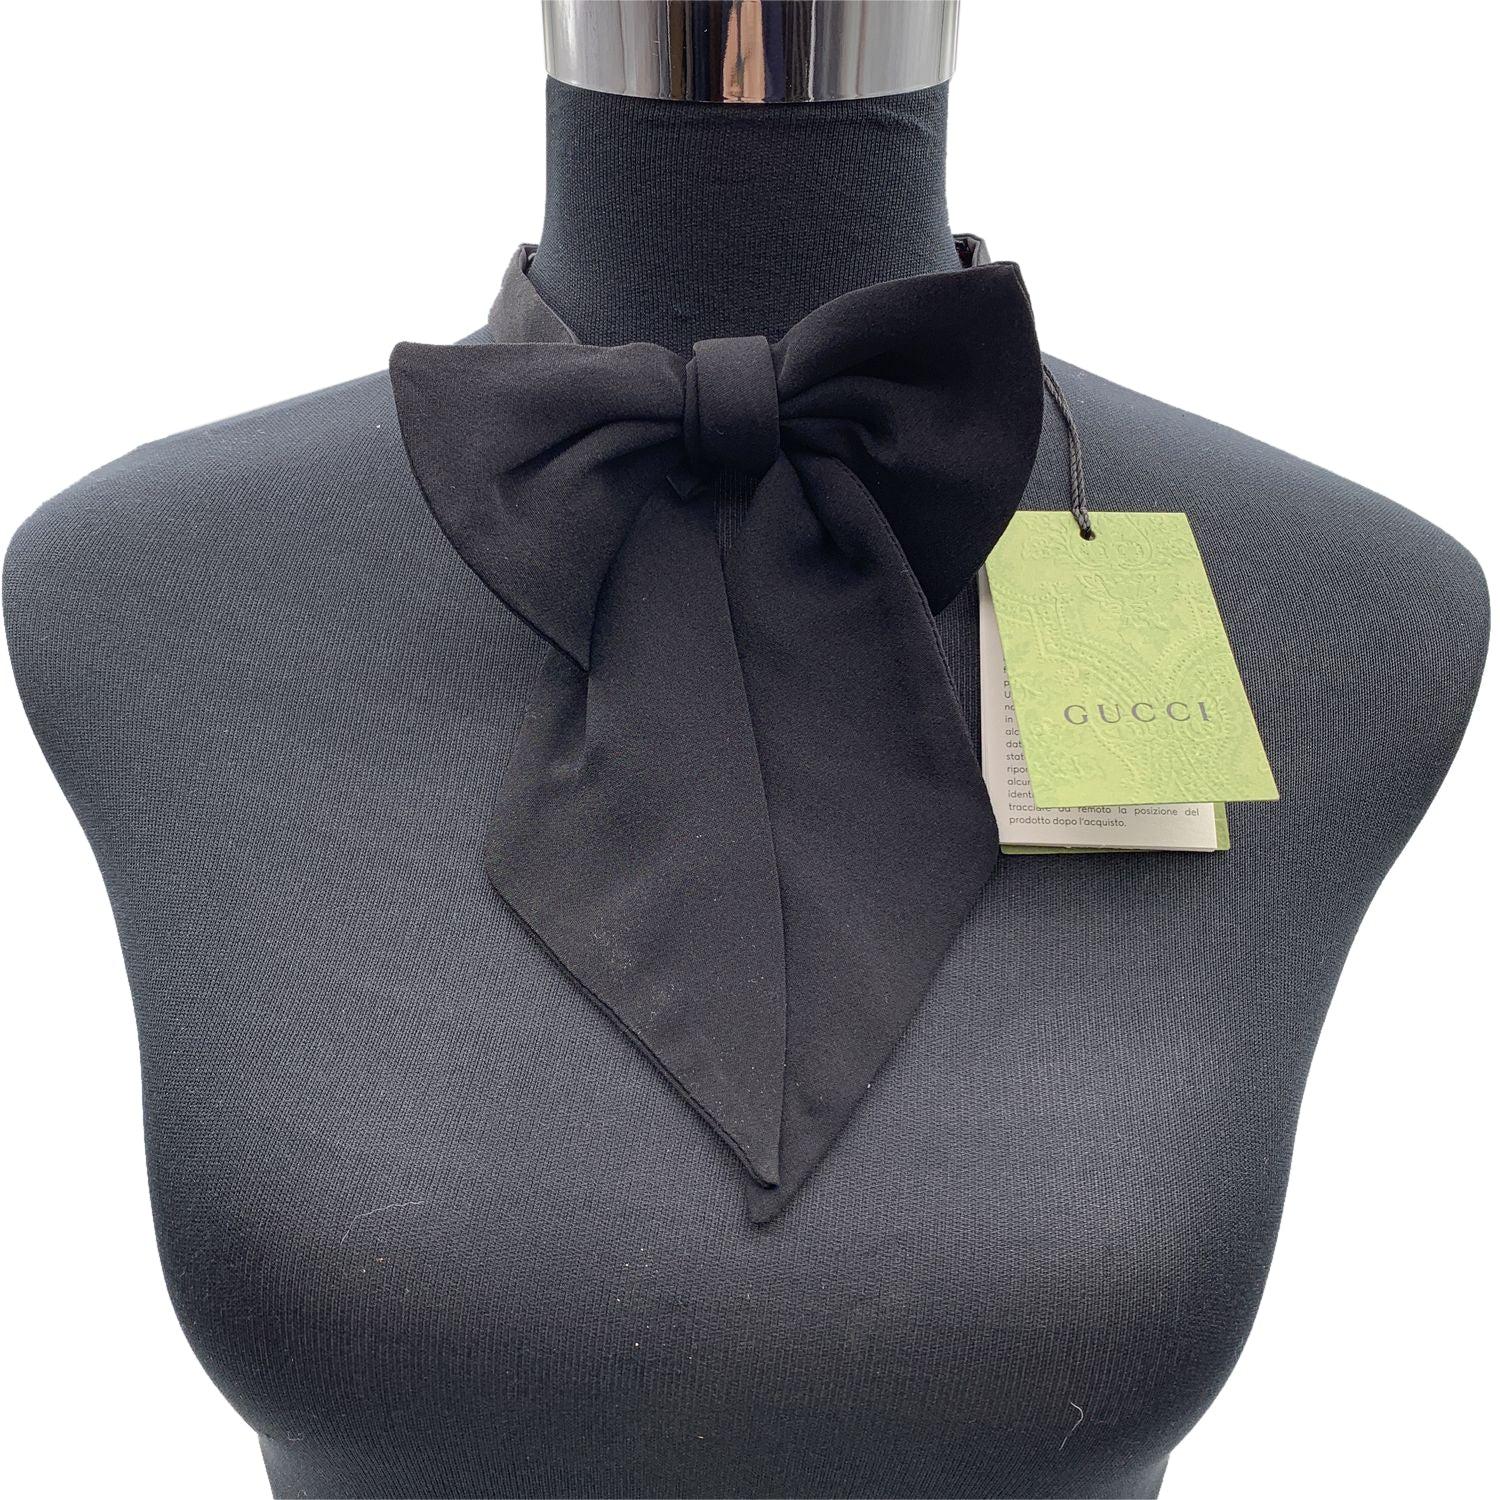 Elegant Gucci bow tie in black silk crepe. Pre-tied with elongated tips and adjustable back hook closure. Max width: 5.5 inches - 14 cm. Lenght of the strap around the neck: 15.5 inches - 39.4 cm Details MATERIAL: Silk COLOR: Black MODEL: - GENDER: